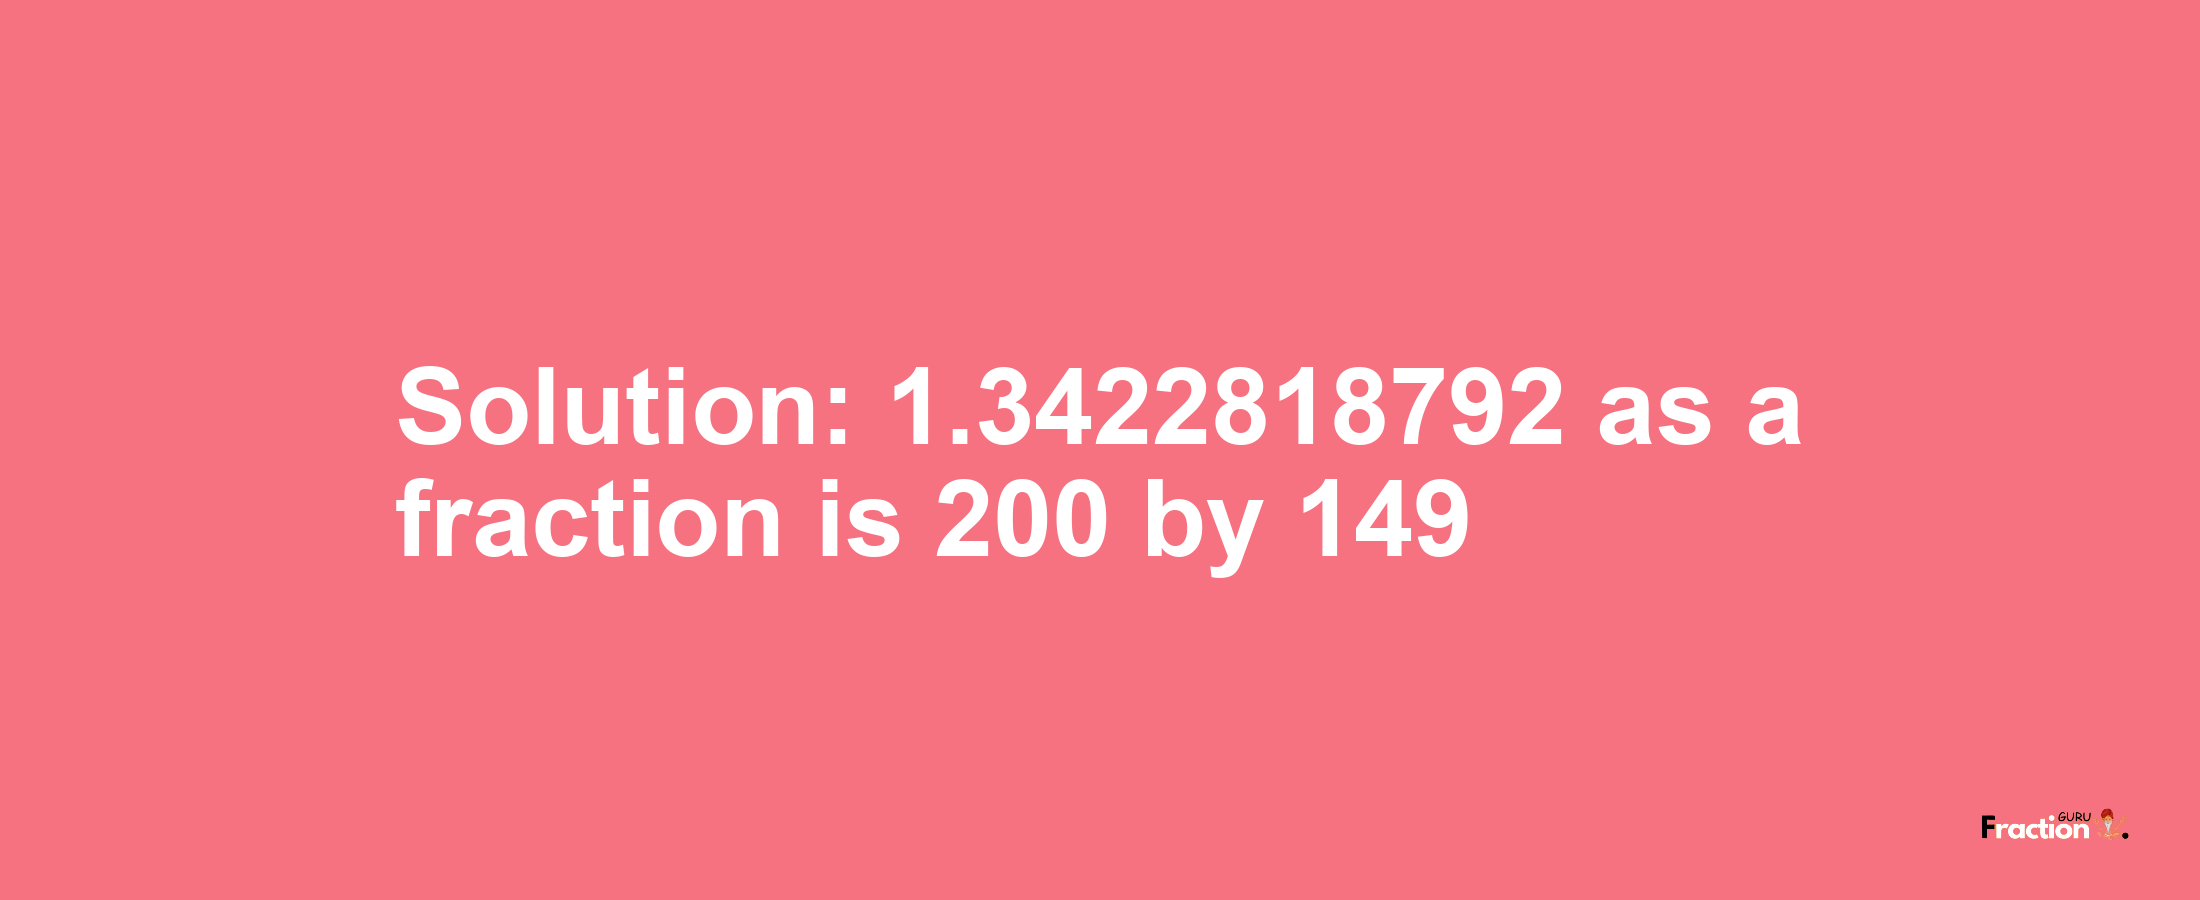 Solution:1.3422818792 as a fraction is 200/149